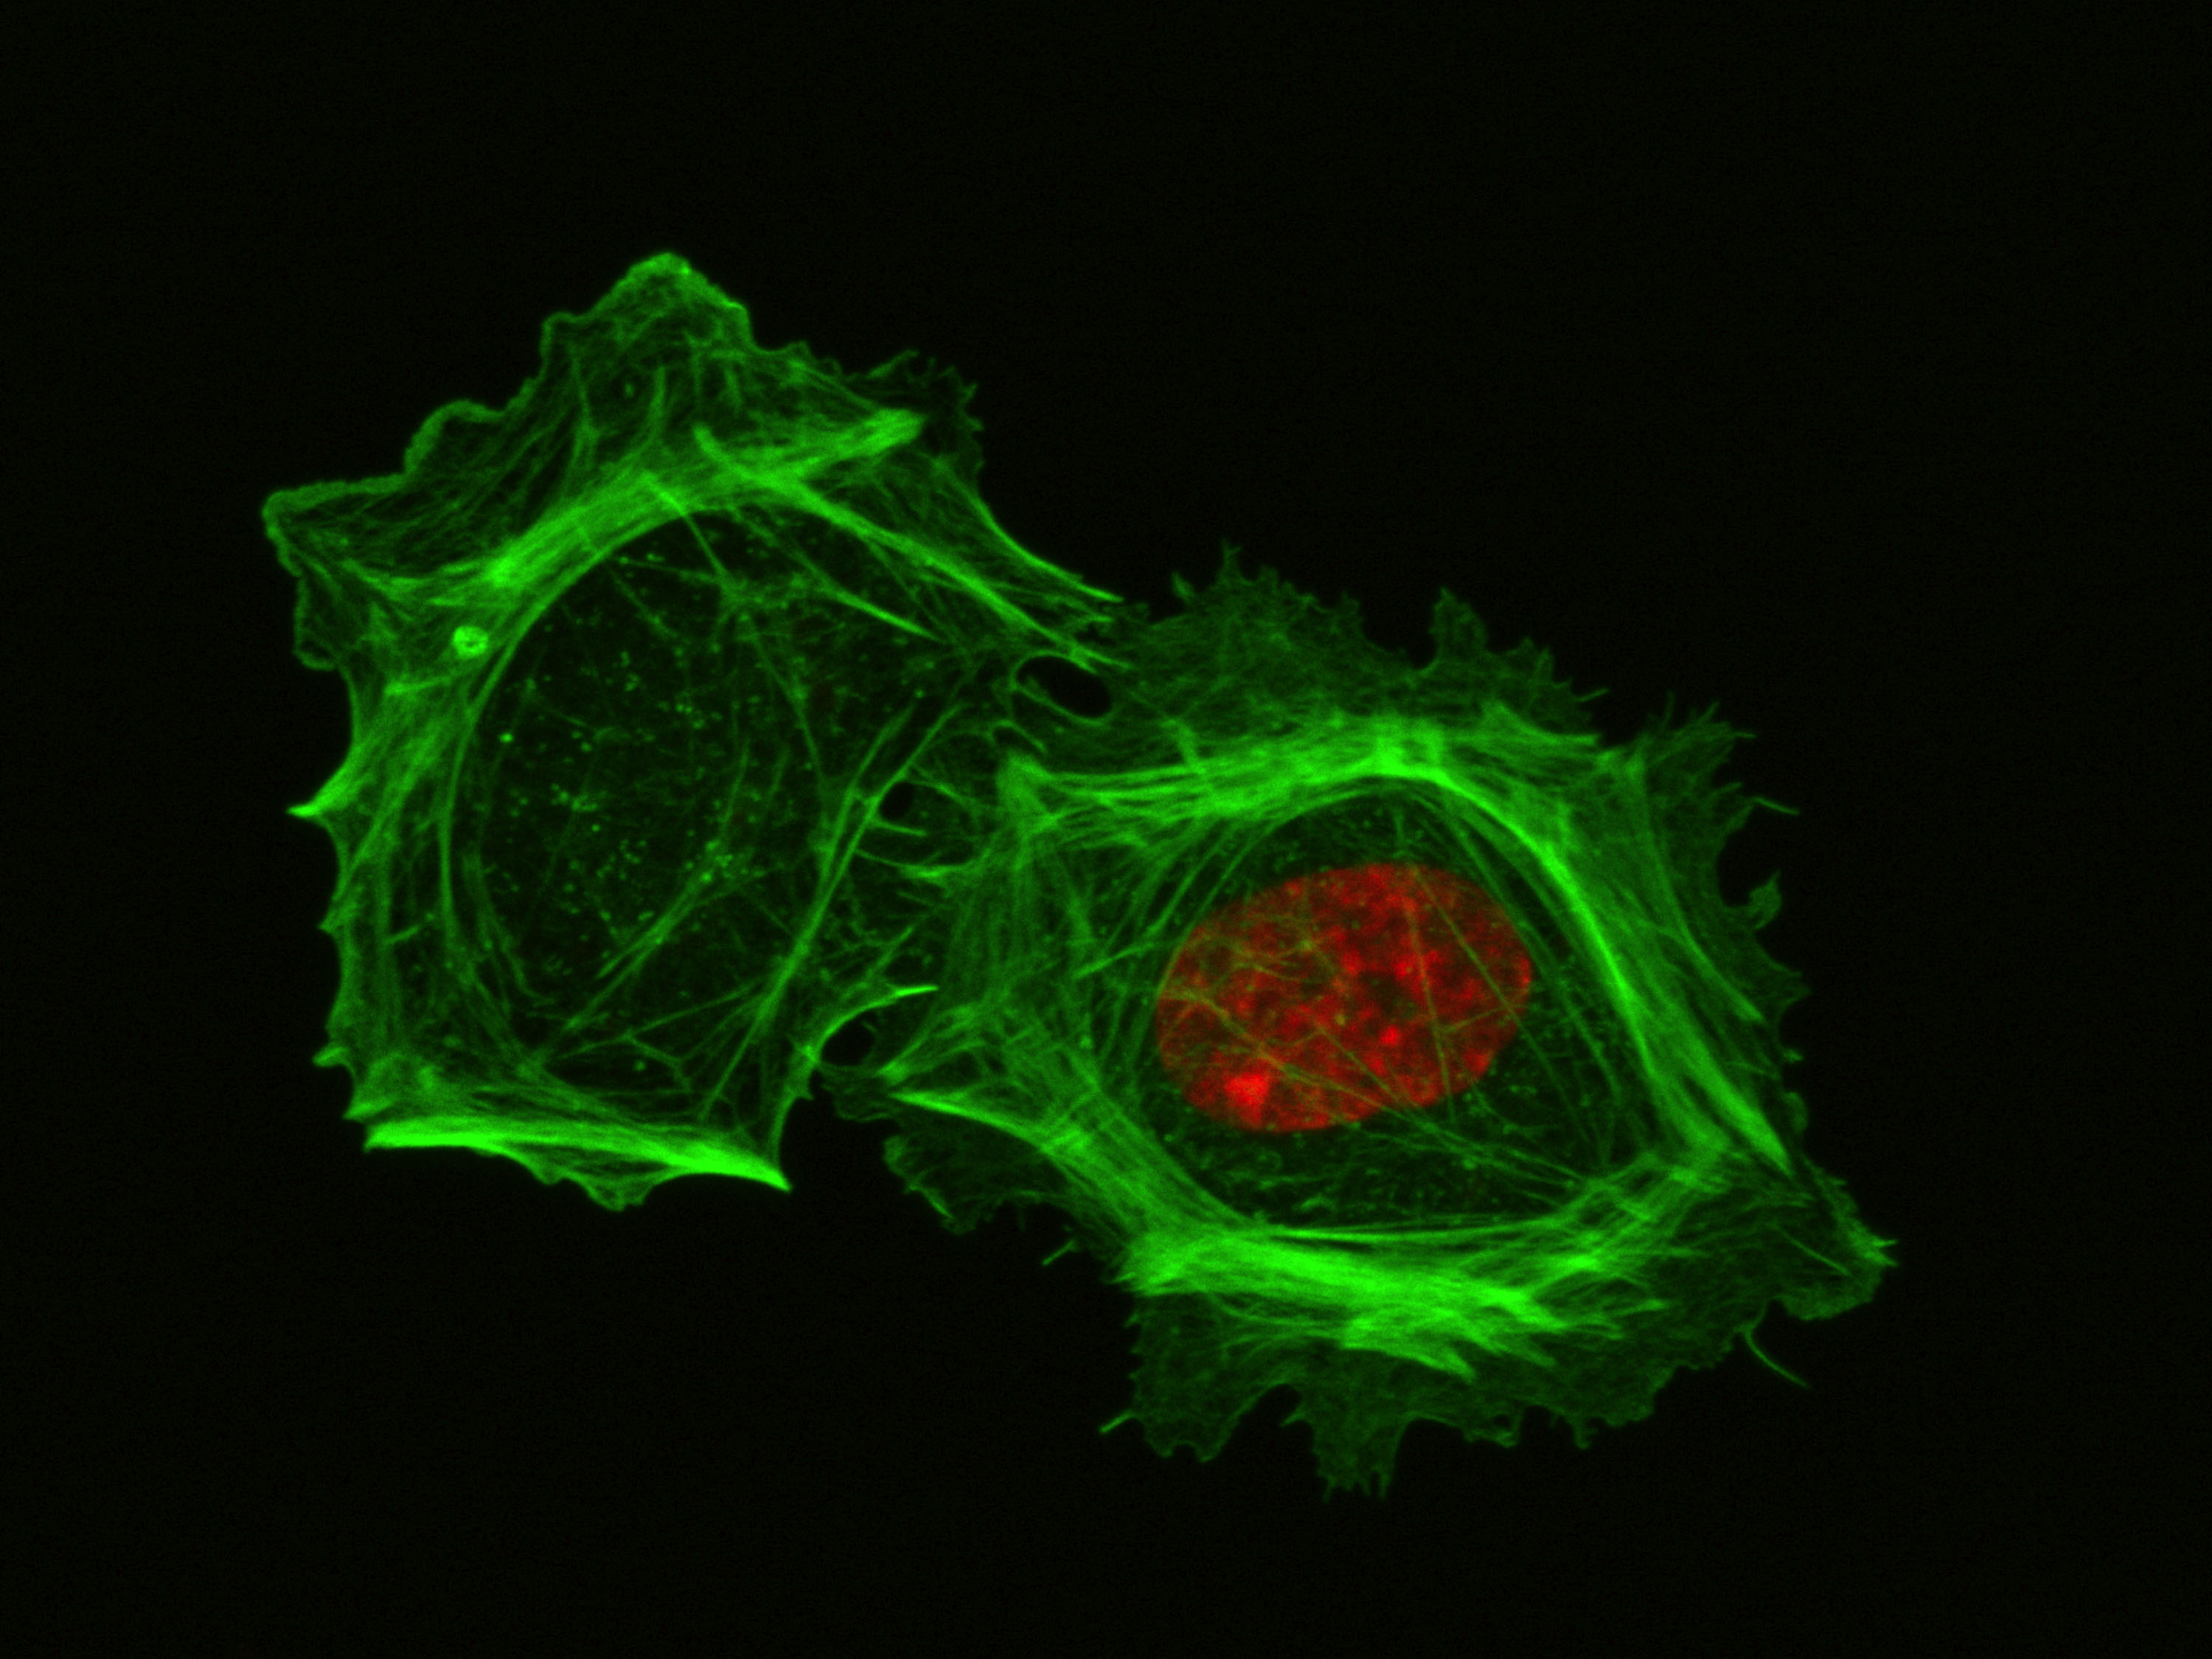 Two human endothelial cells are shown. The cell to the left had its nucleus removed. The cells have been stained with phalloidin to label in green the actin cytoskeleton, and with a different dye to label the nucleus red.